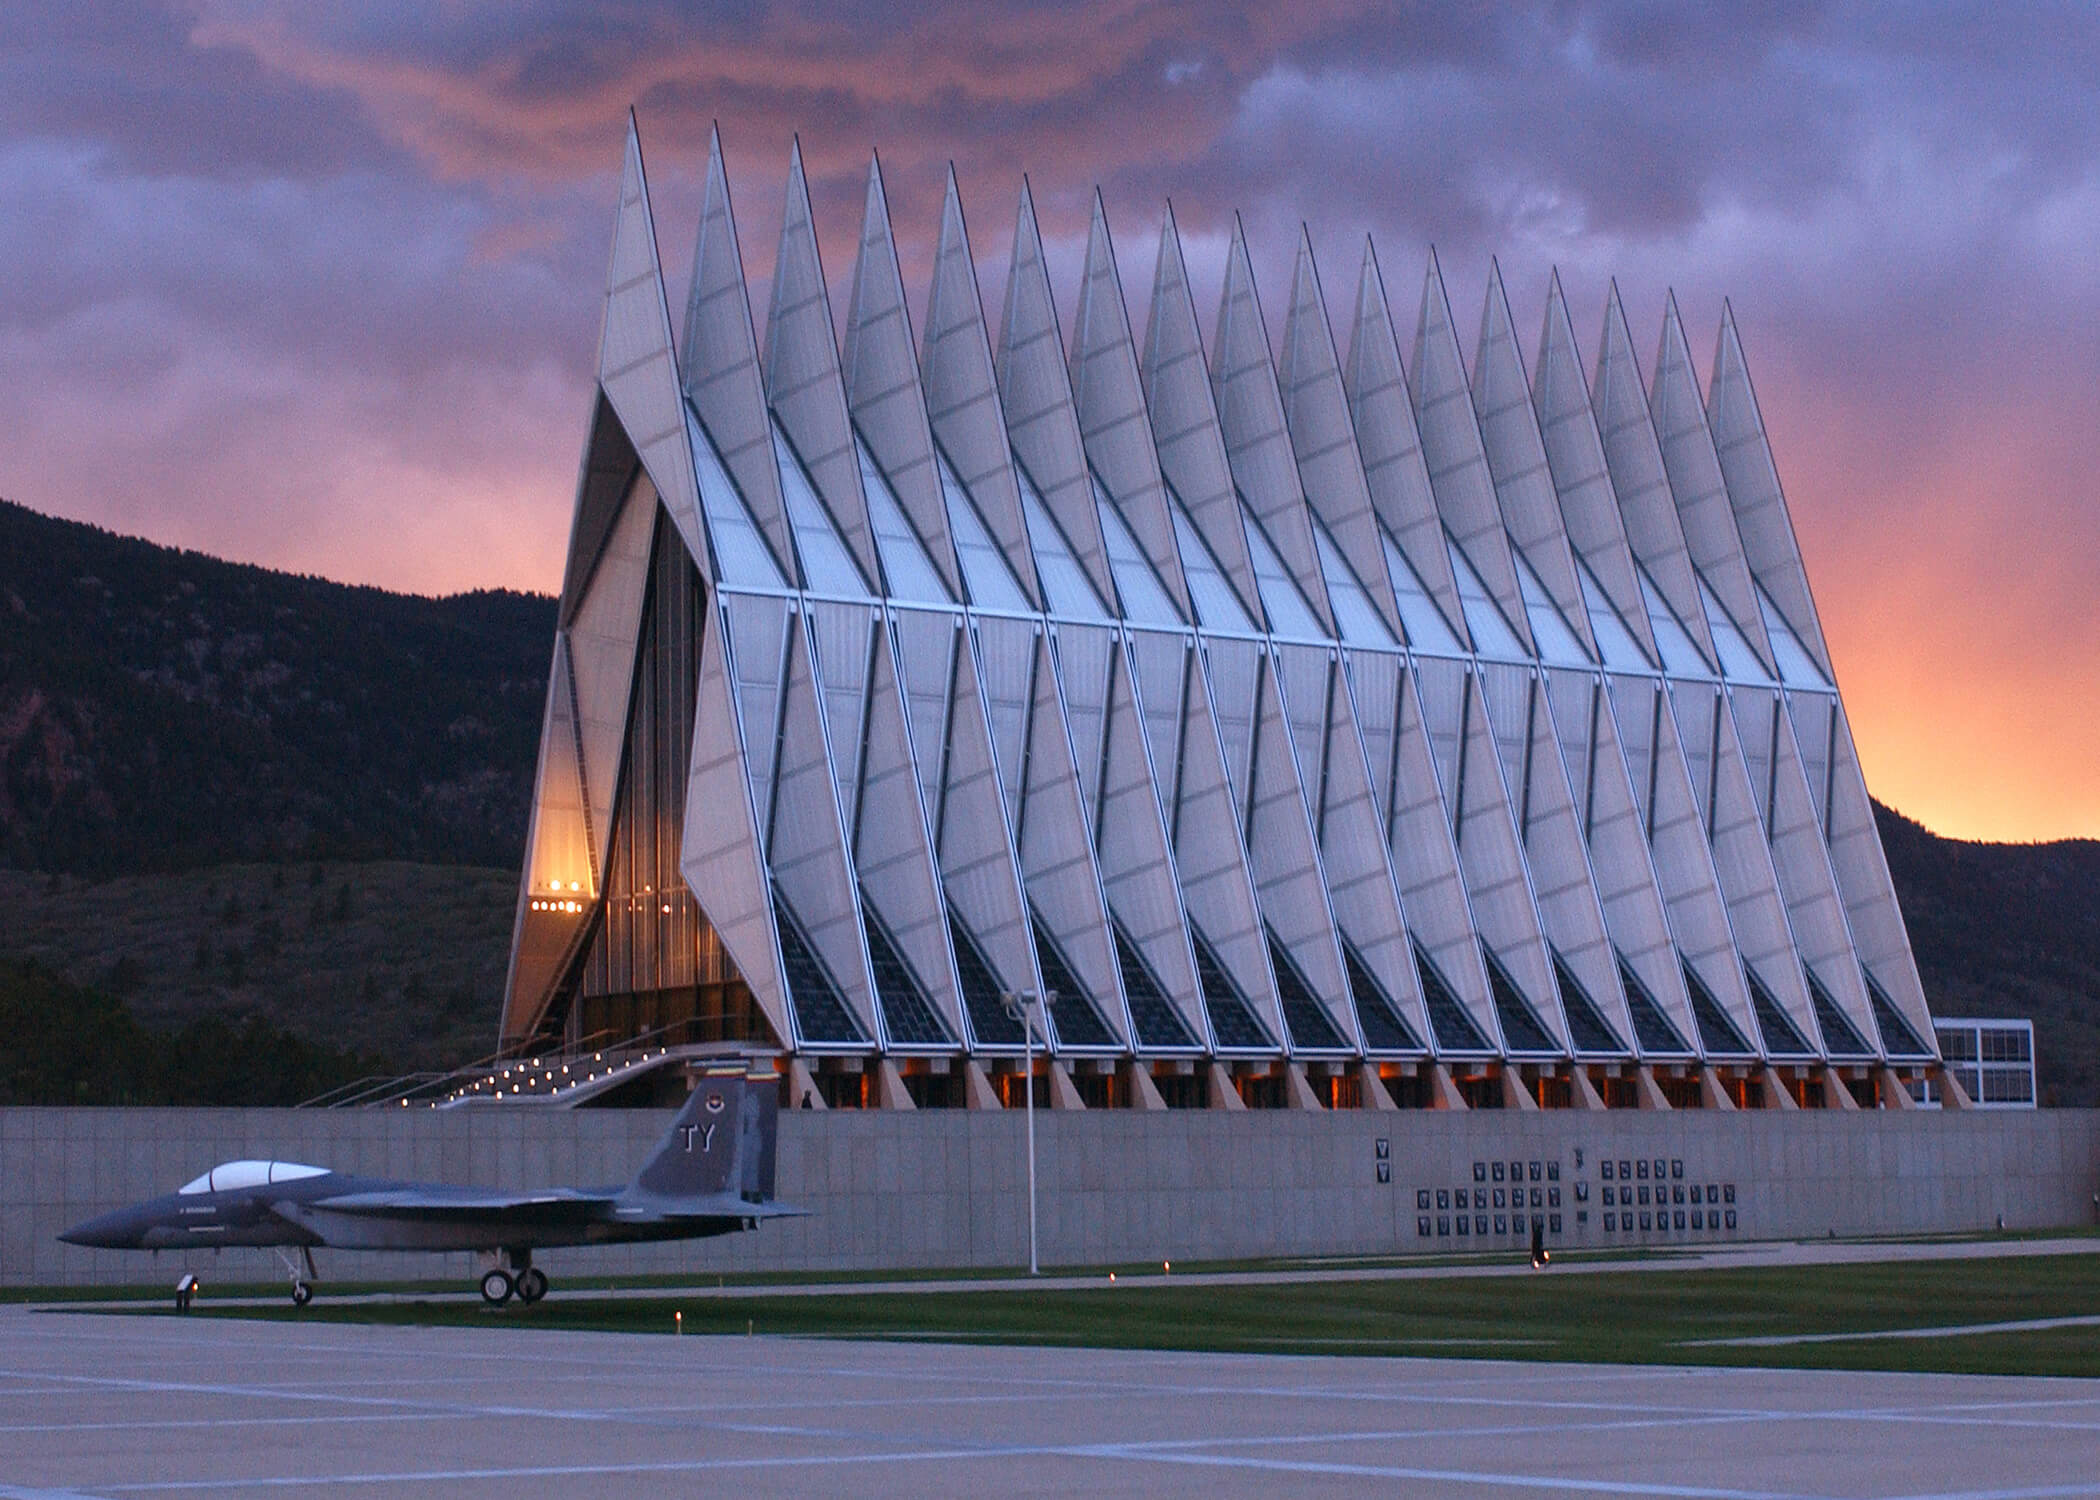 Image of a cadet chapel at the U.S. Air Force Academy.